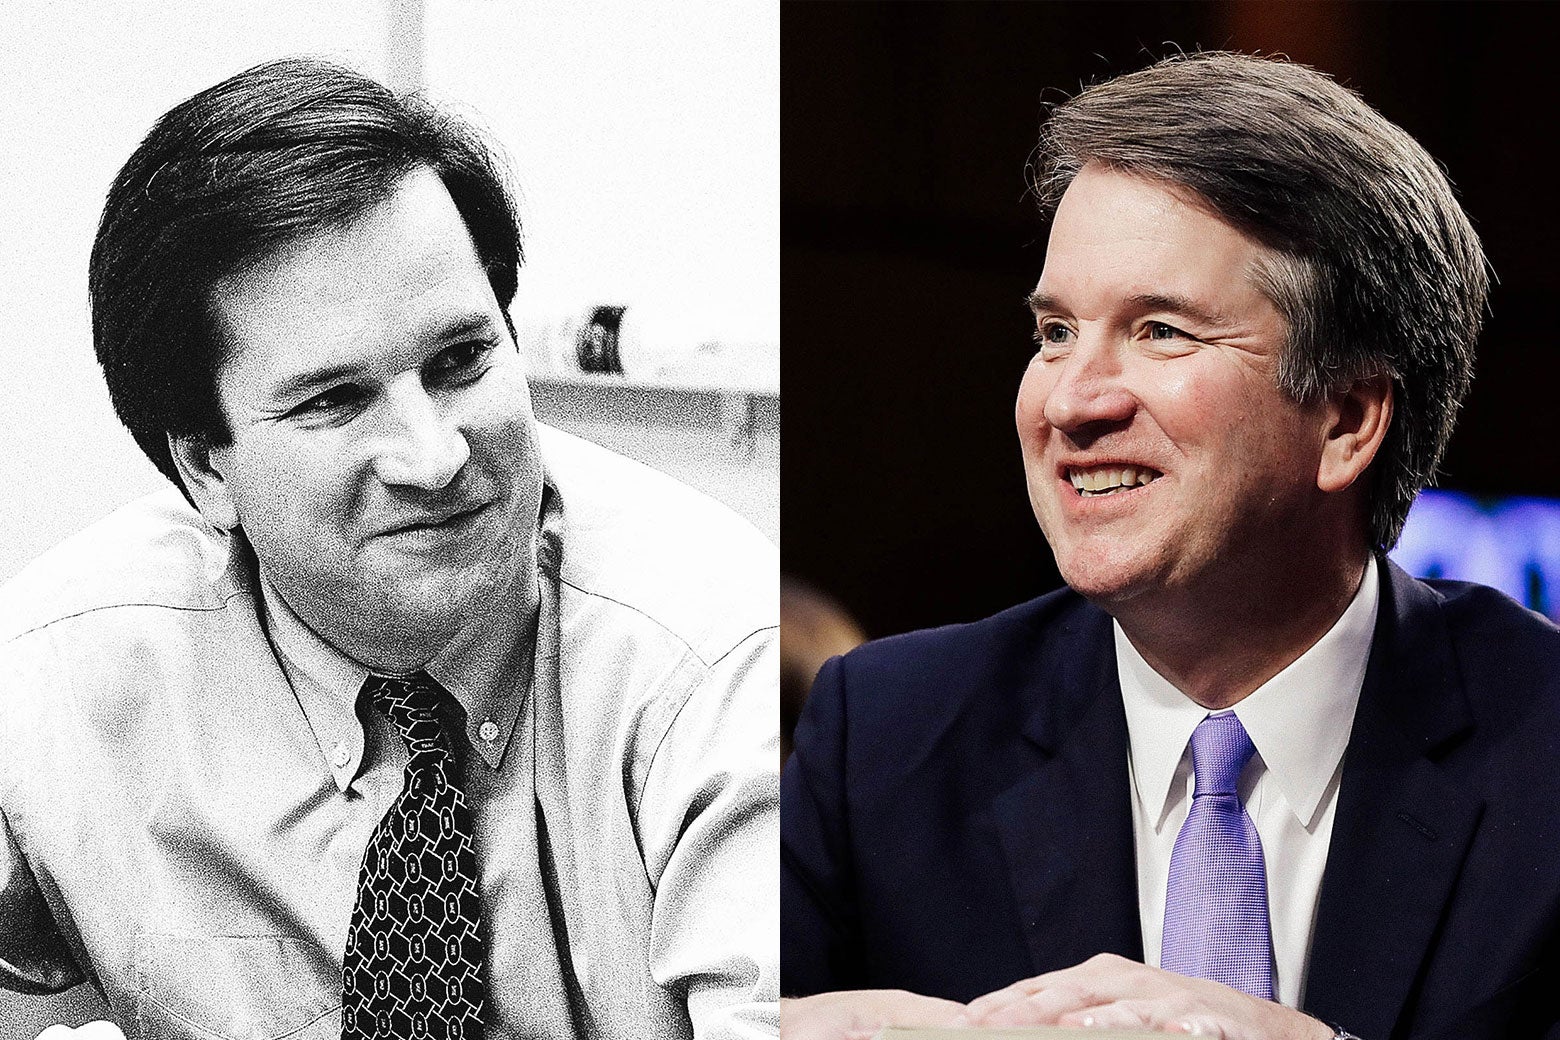 Kavanaugh photographed in 1996 and 2018.